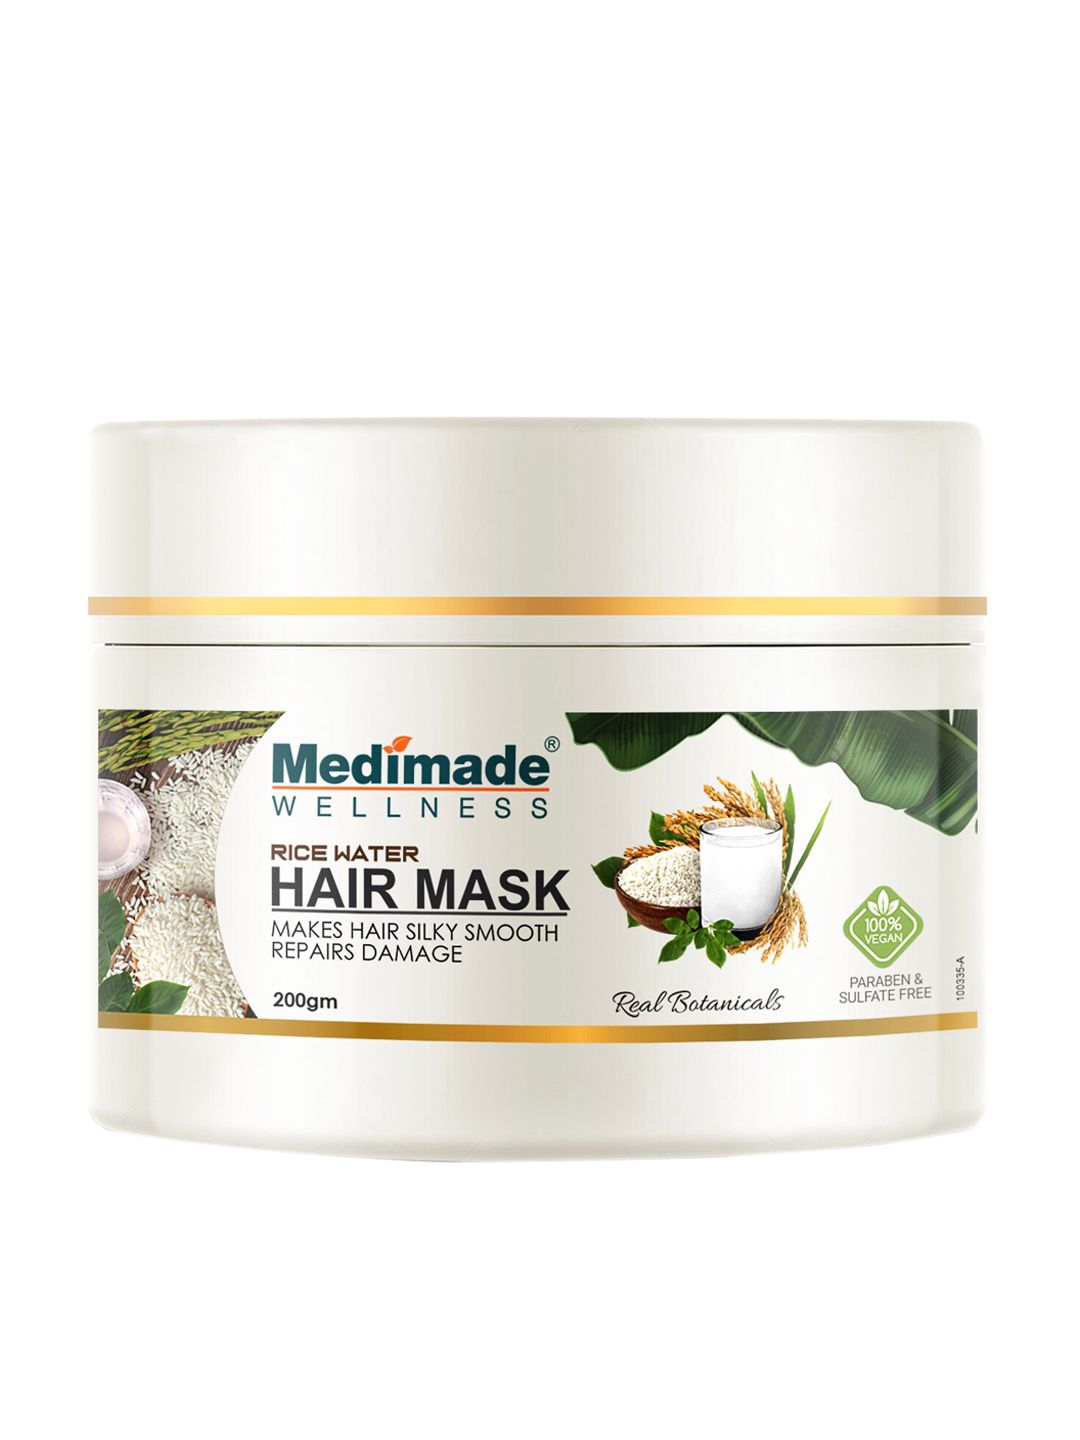 Medimade Wellness Rice Water Hair Mask - 200 g Price in India